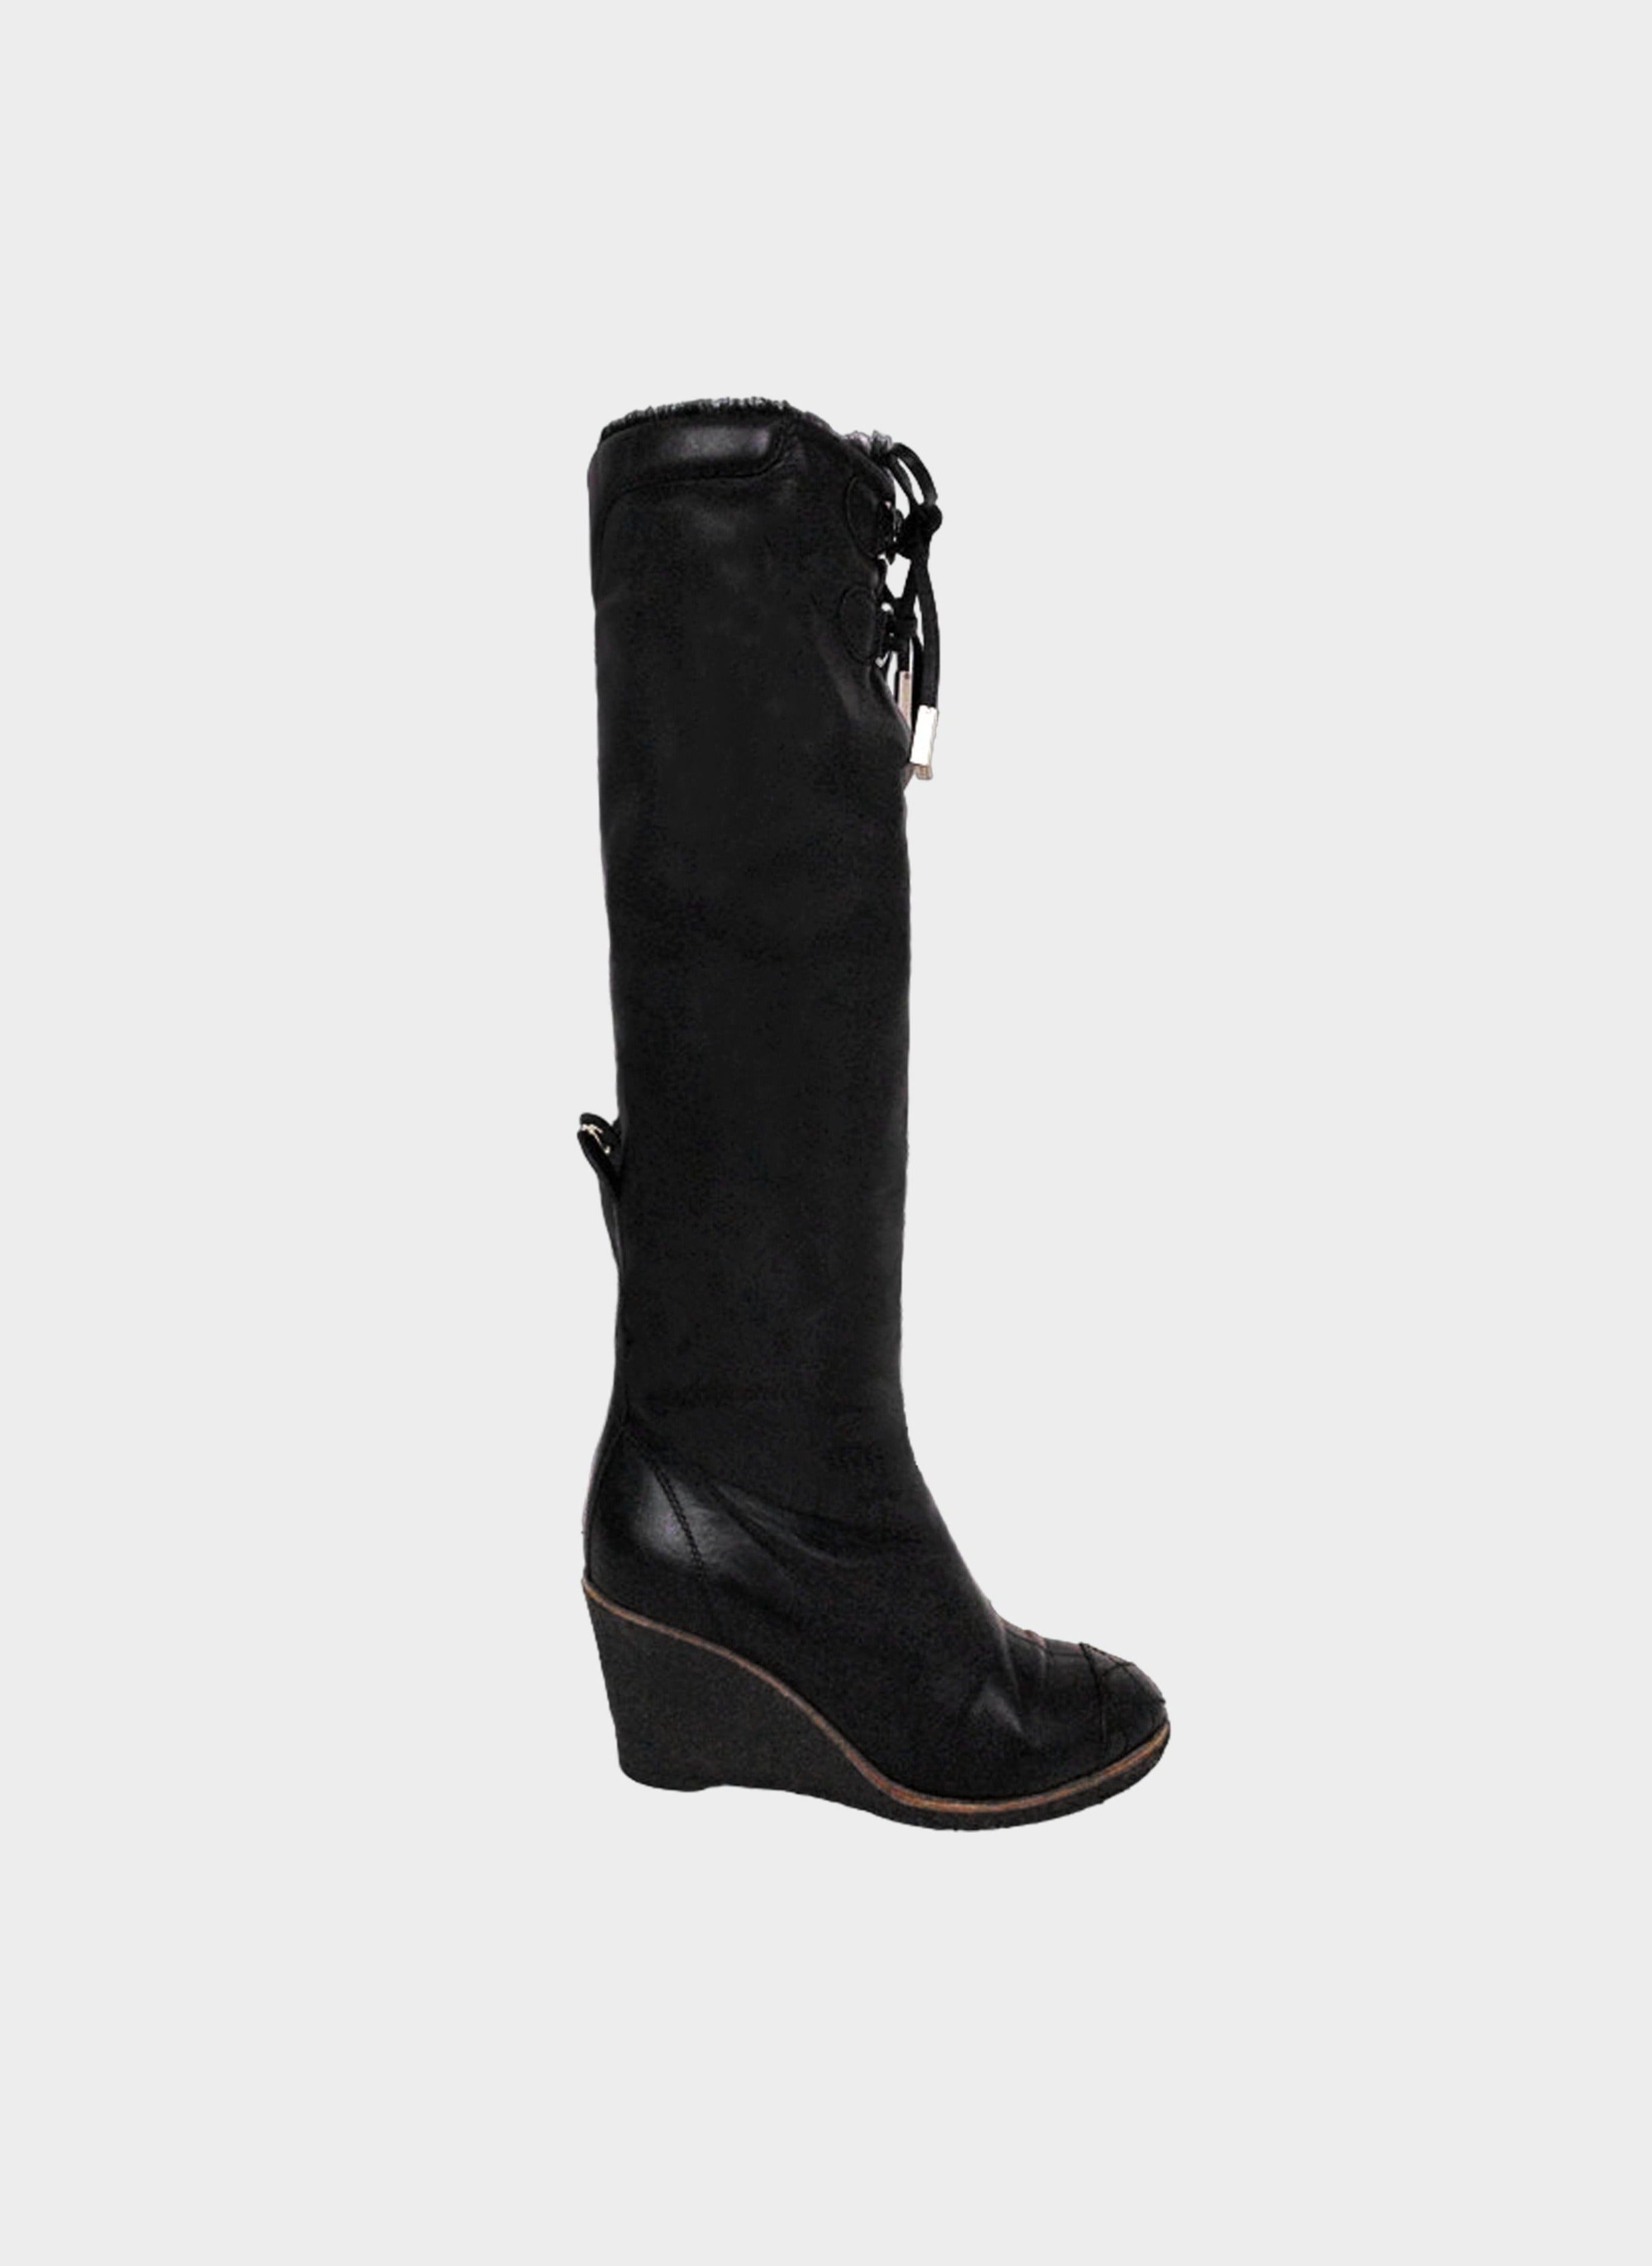 Chanel 2010s Black Leather Fur-lined Wedged Long Boots